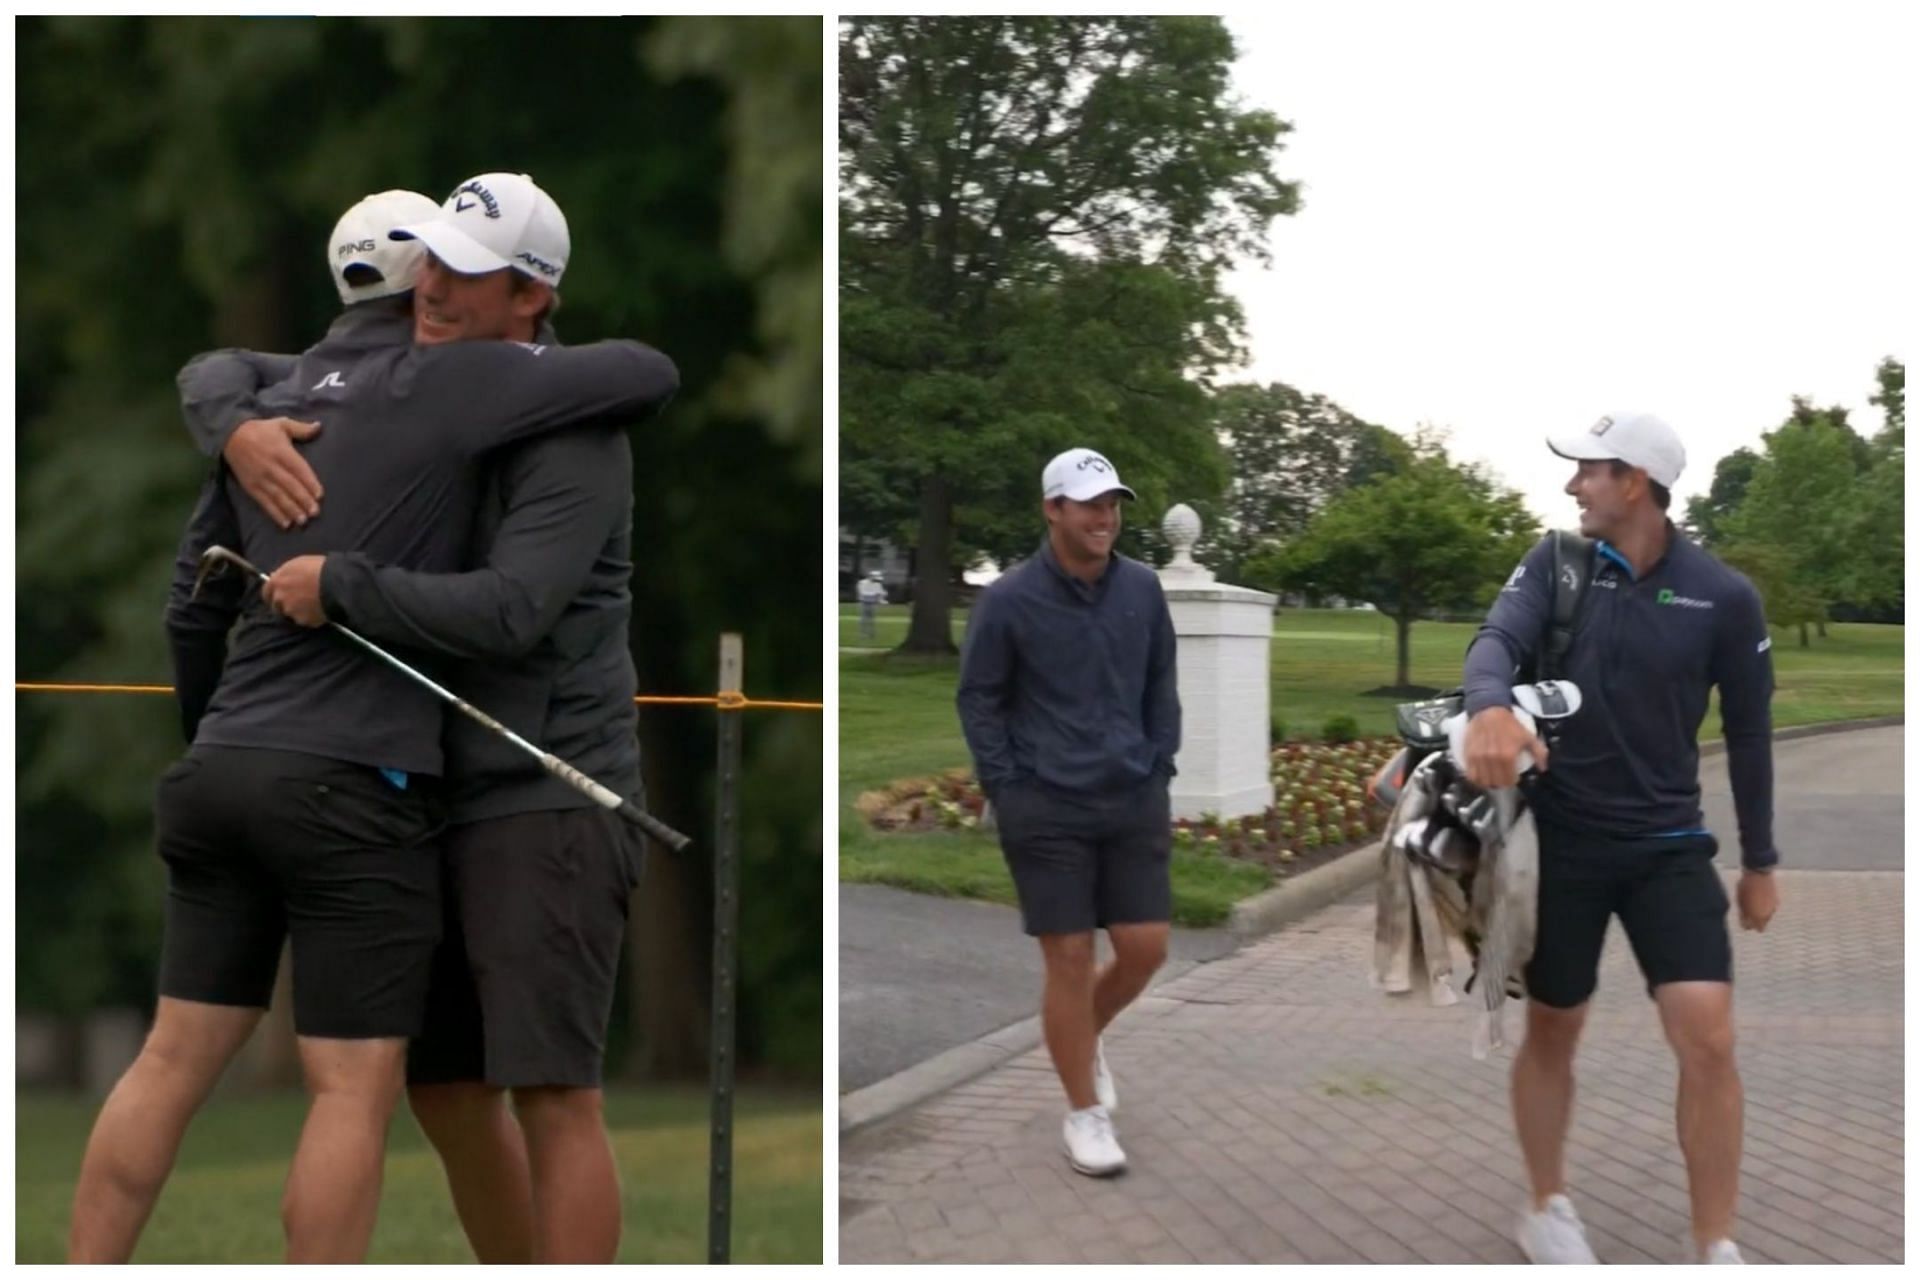 Viktor Hovland caddied for his friend Zach Bauchou at the US Open qualifying event at Brookside Golf &amp; Country Club (Image via Twitter/PGATOUR)